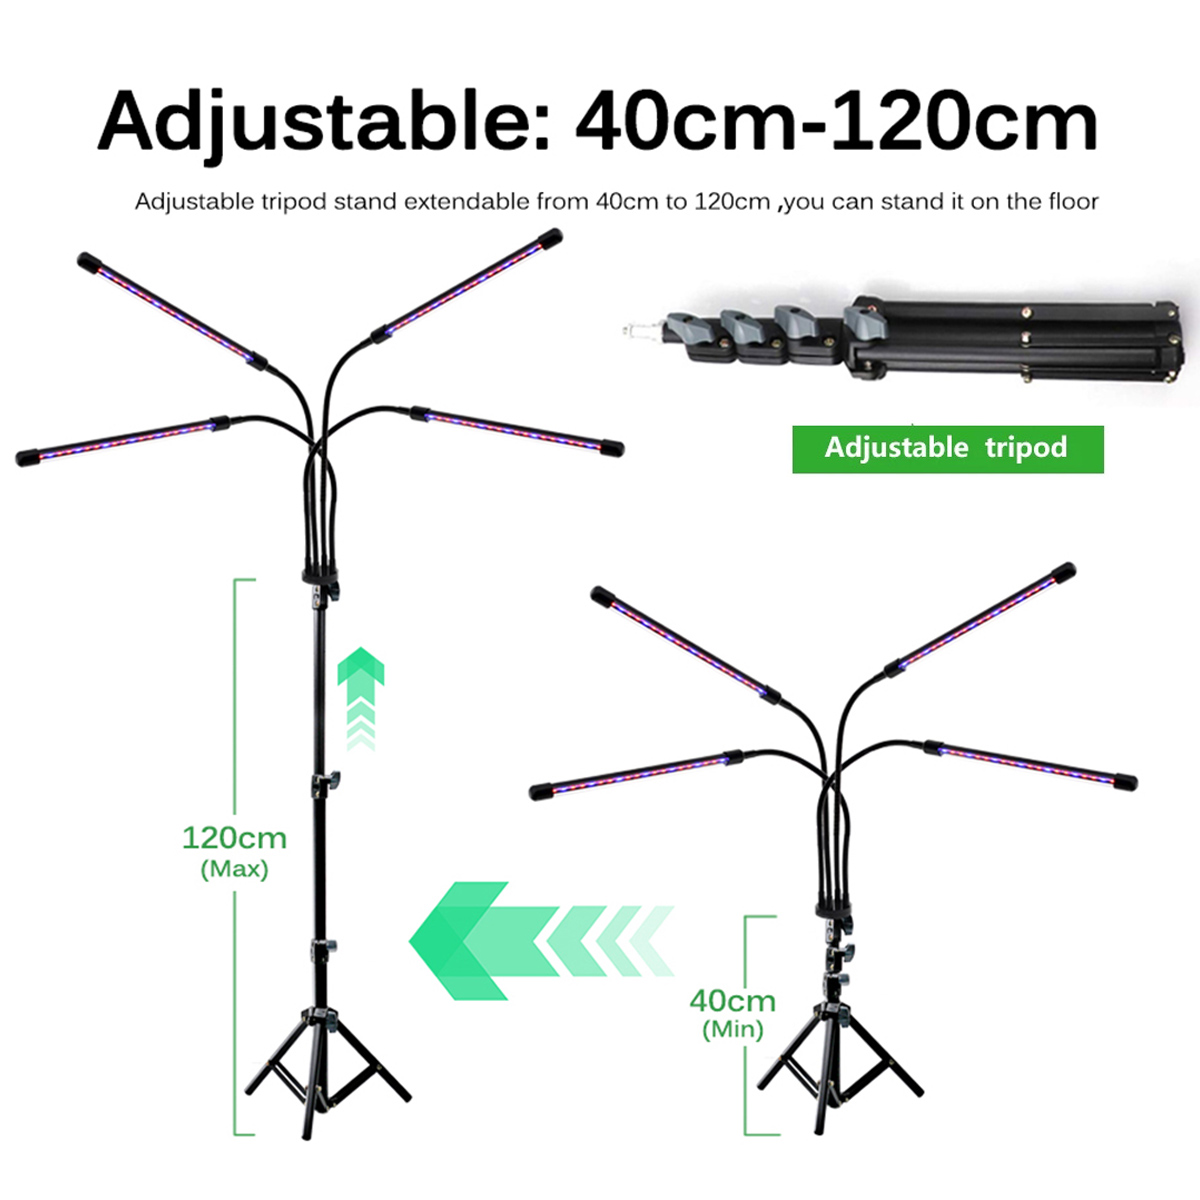 Remote-Control-4-Heads-LED-Grow-Light-Plant-Growing-Lamp-Lights-with-Tripod-for-Indoor-Plants-1836992-4